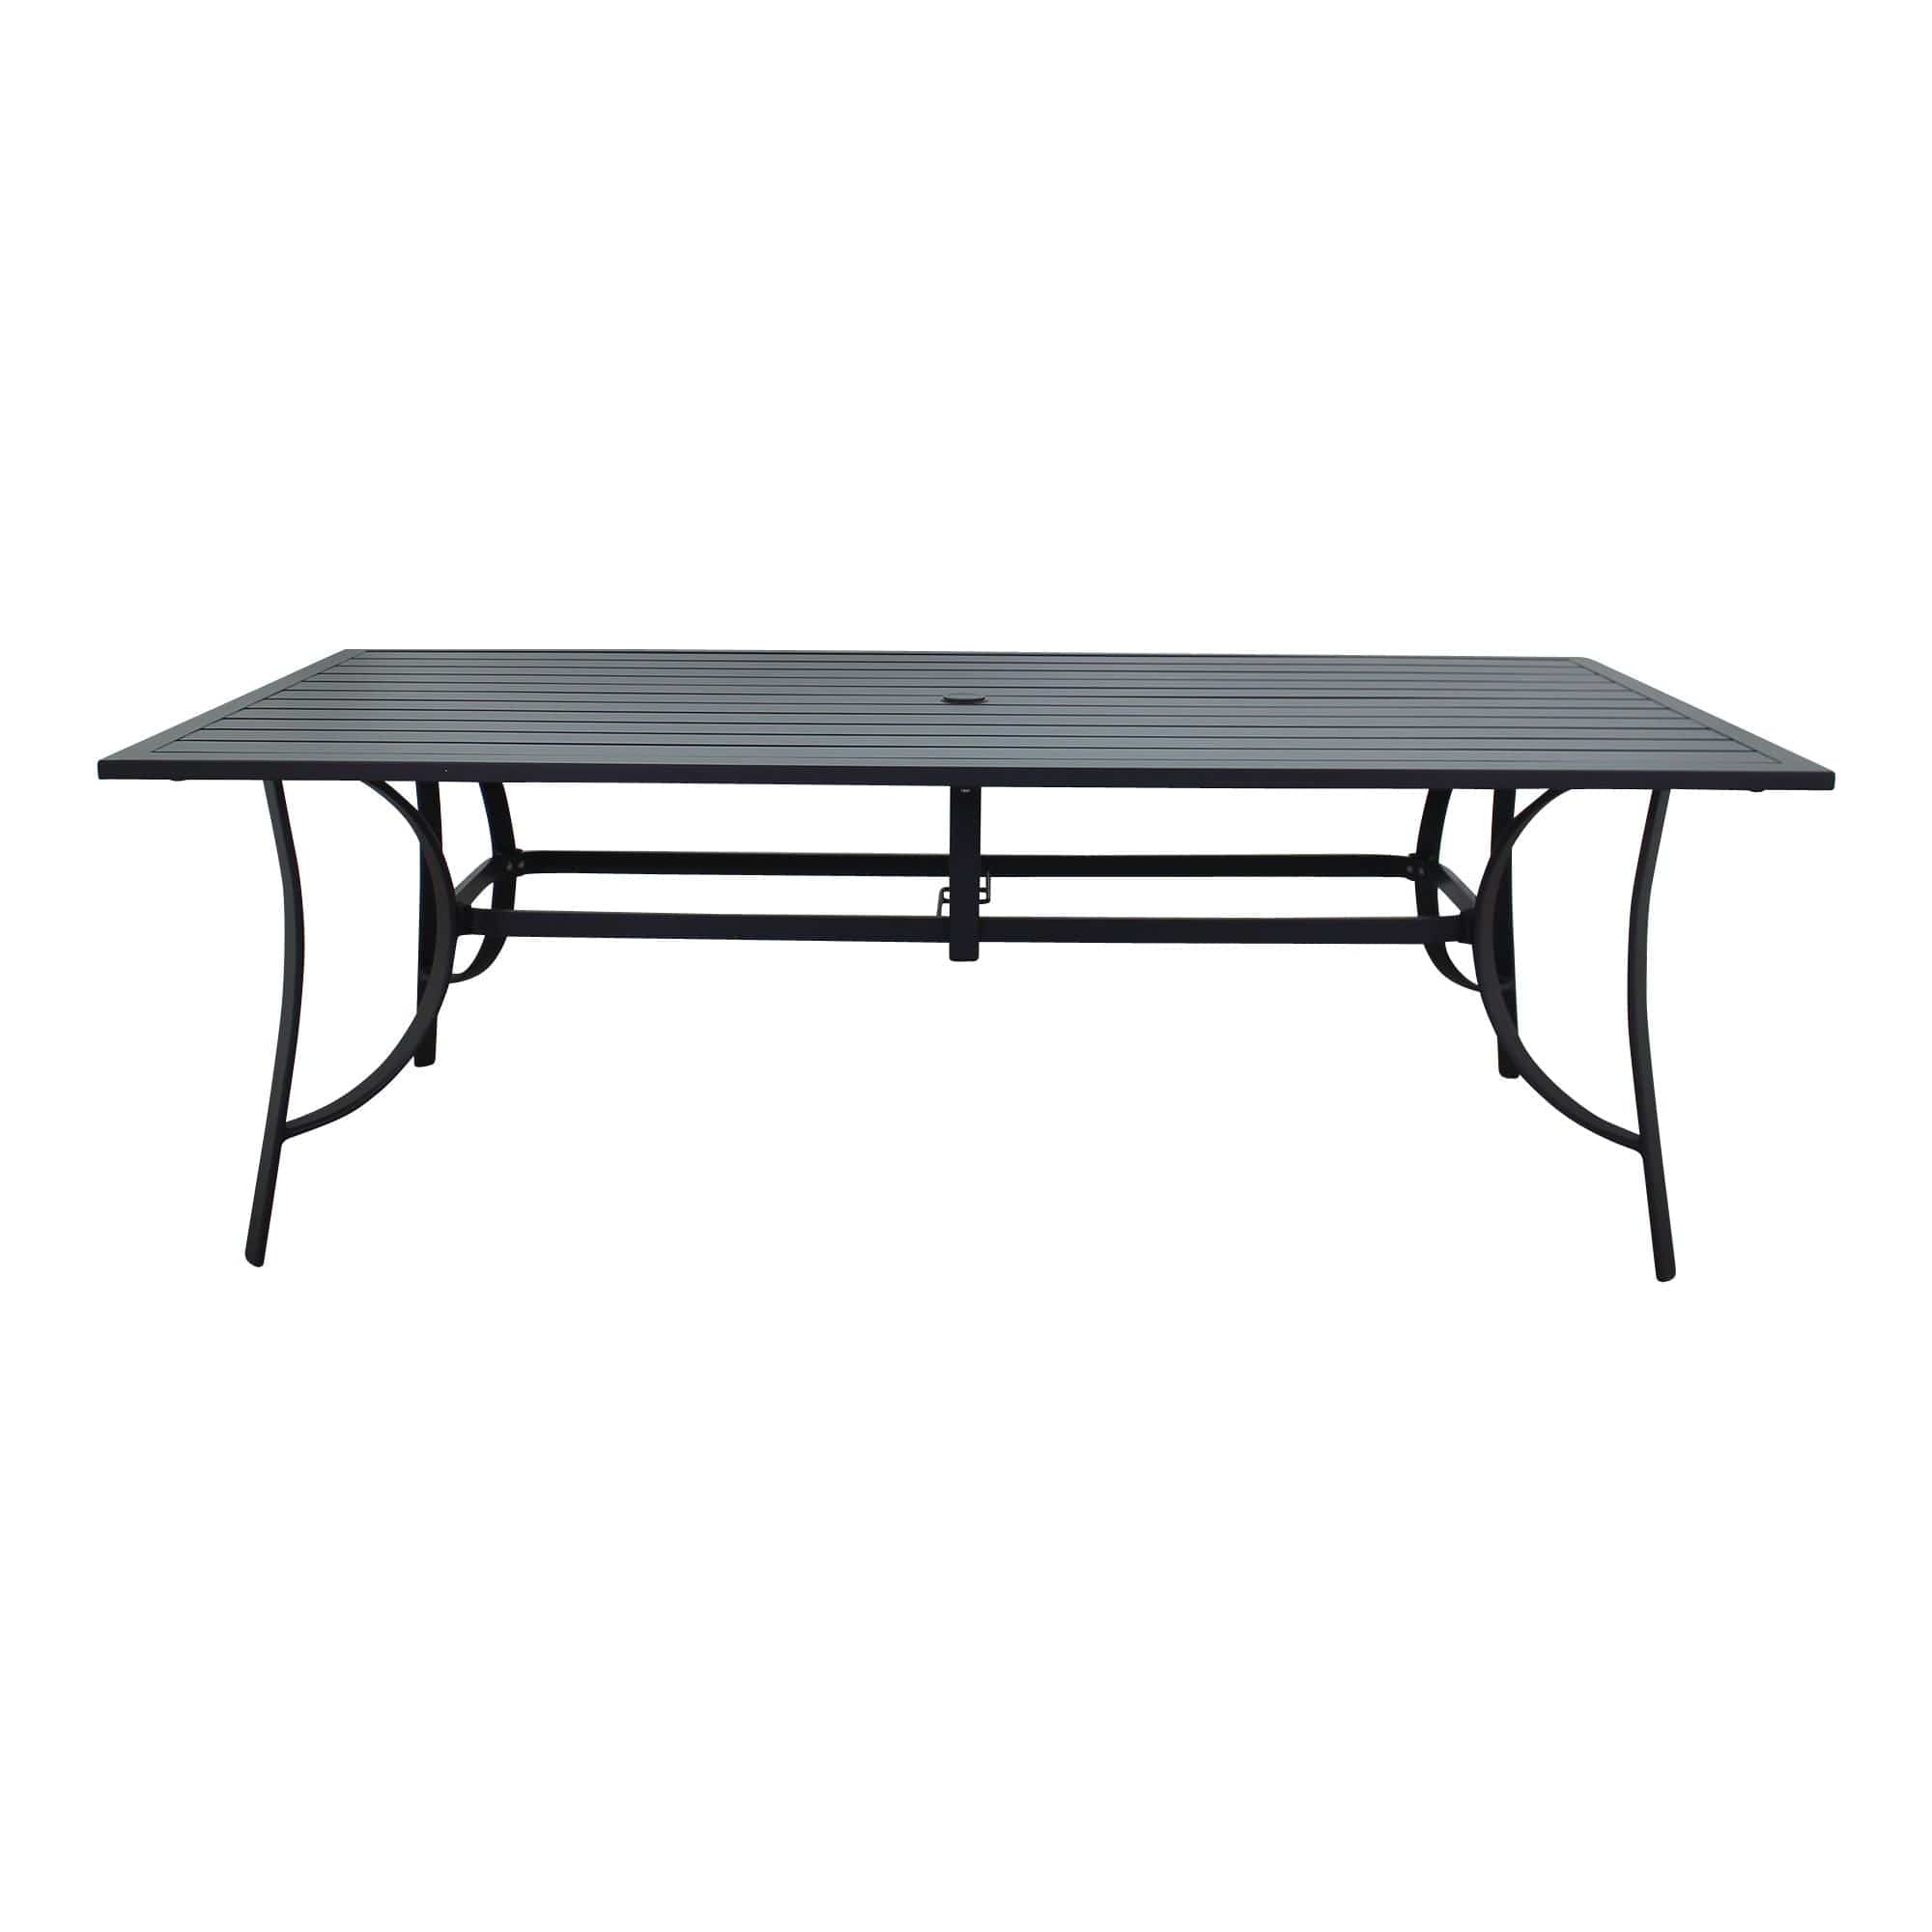 Courtyard Casual Outdoor Dining Table Courtyard Casual -  Santa Fe 84" x 42" Rectangle Aluminum Dining Table with Slat Top and Umbrella Hole in Java | 5676